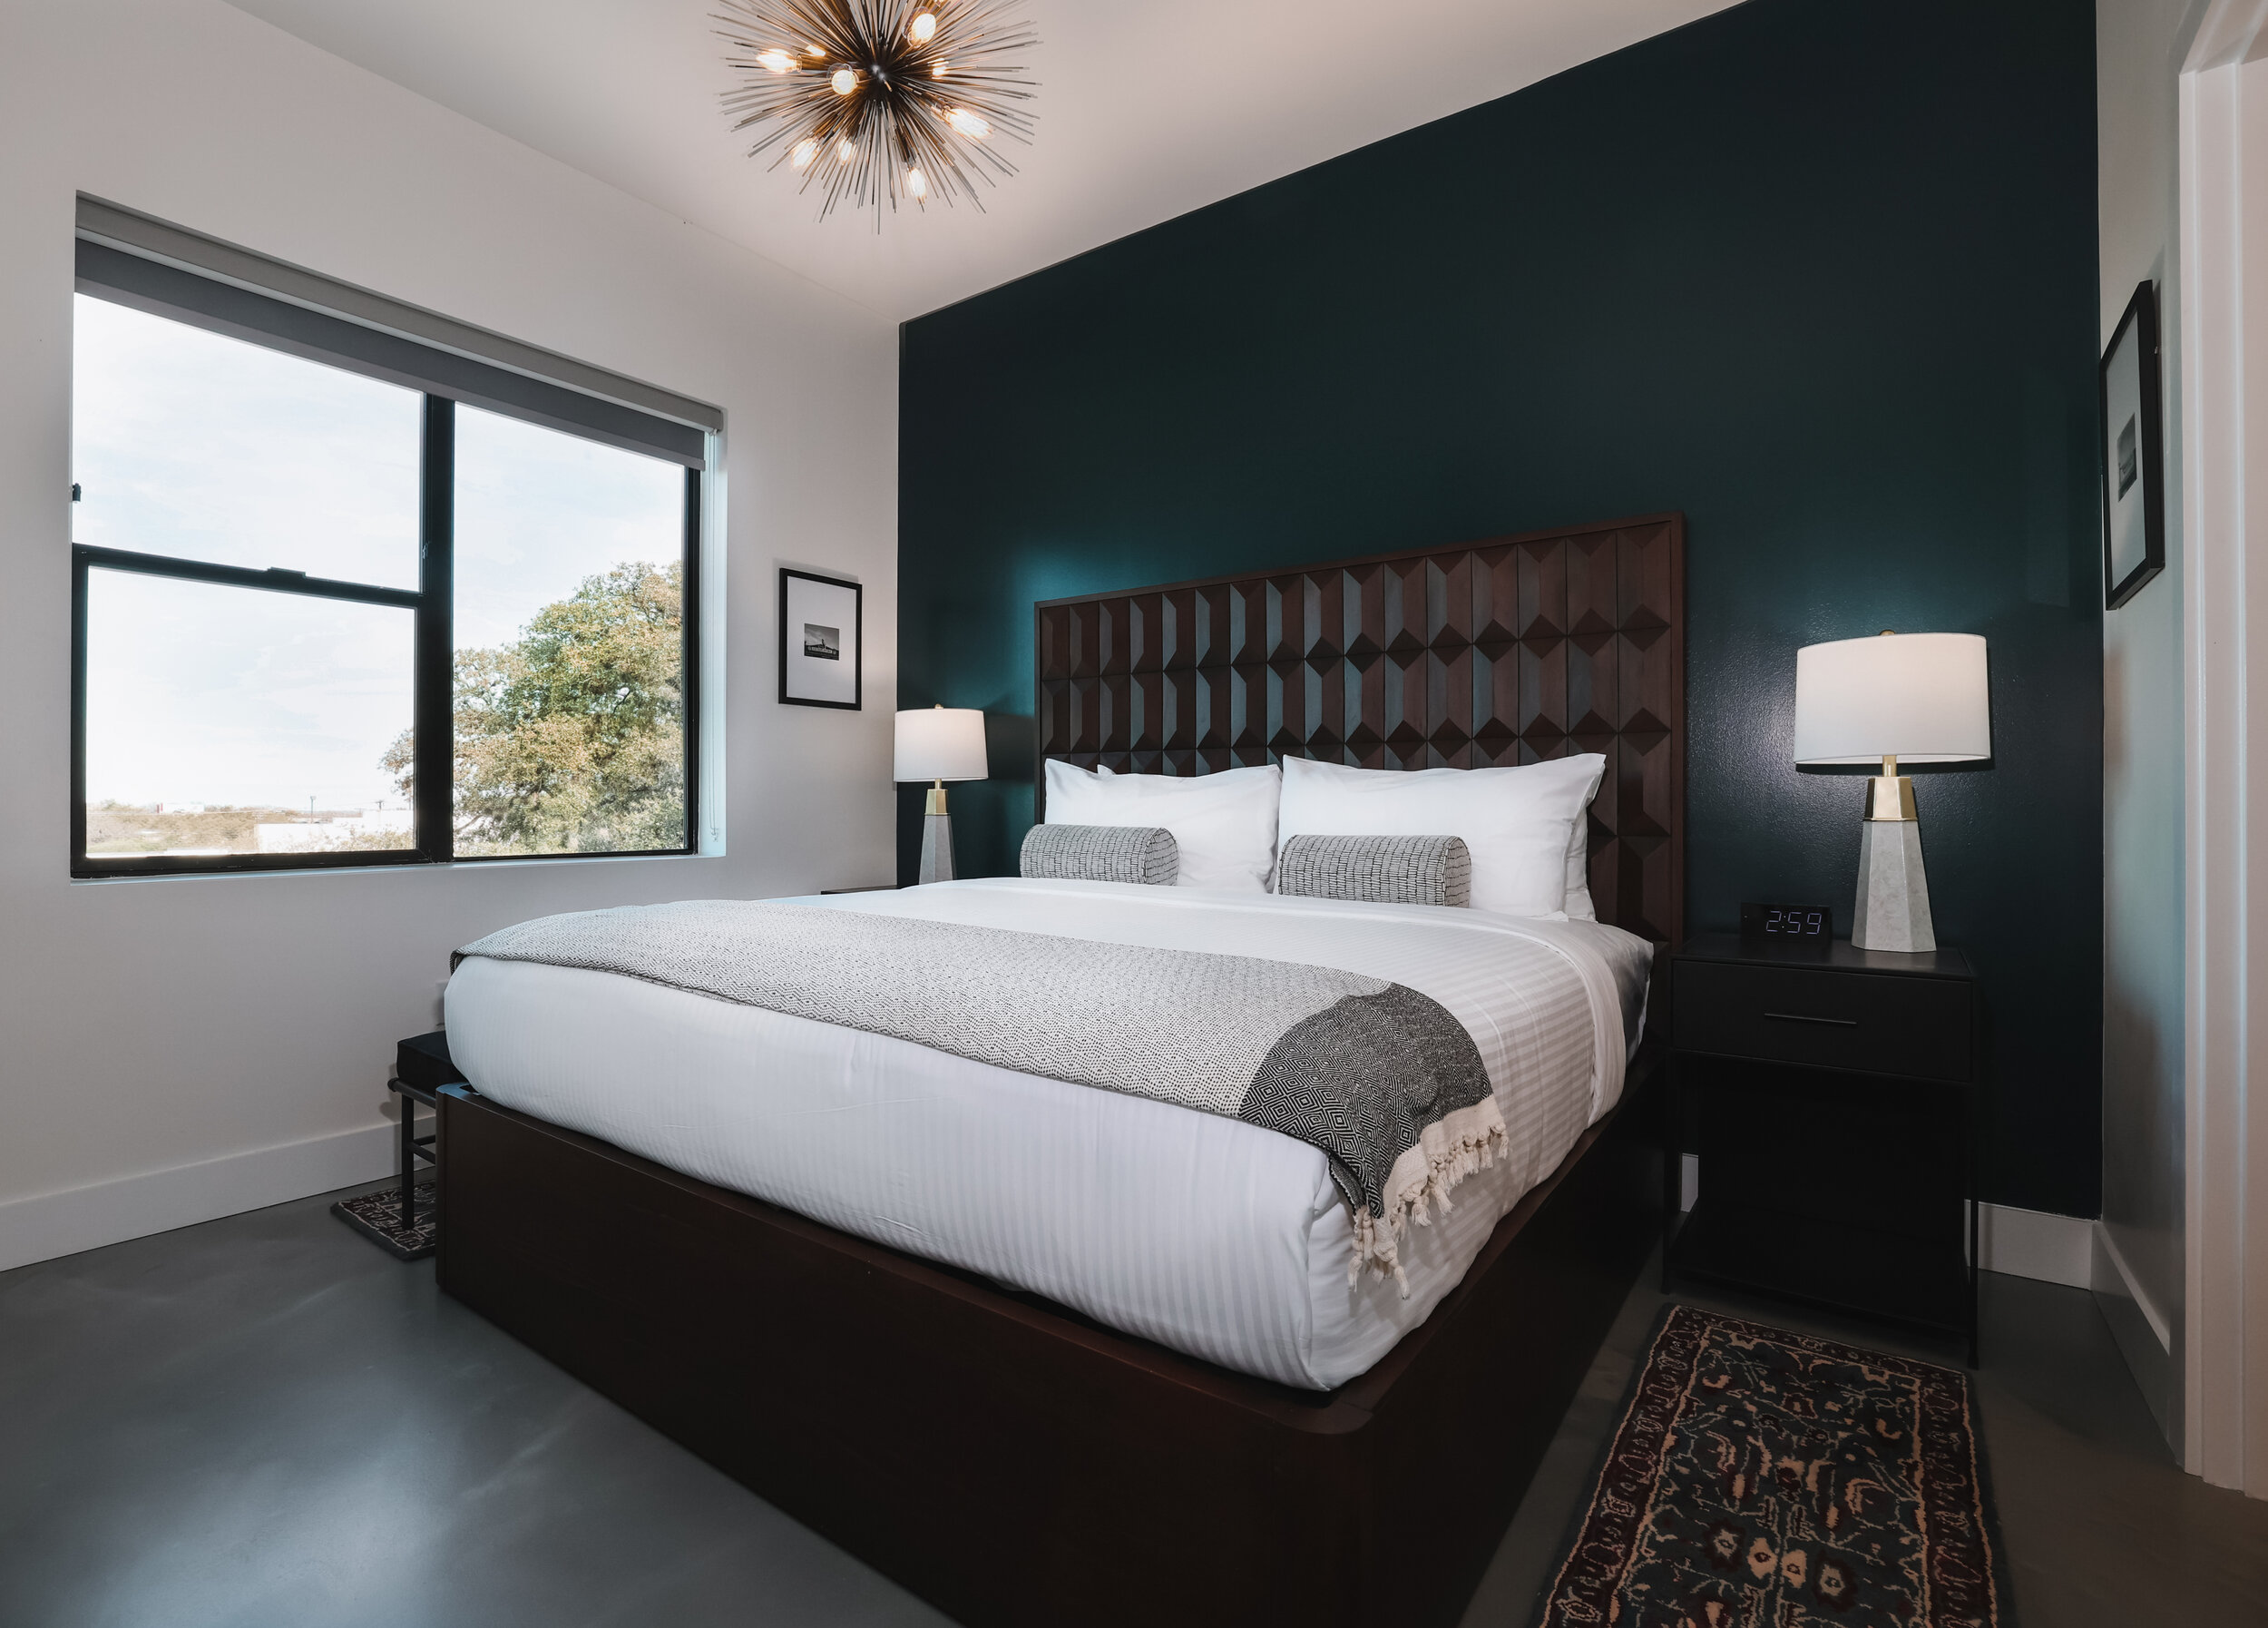 king bed in master bedroom against dark blue accent wall